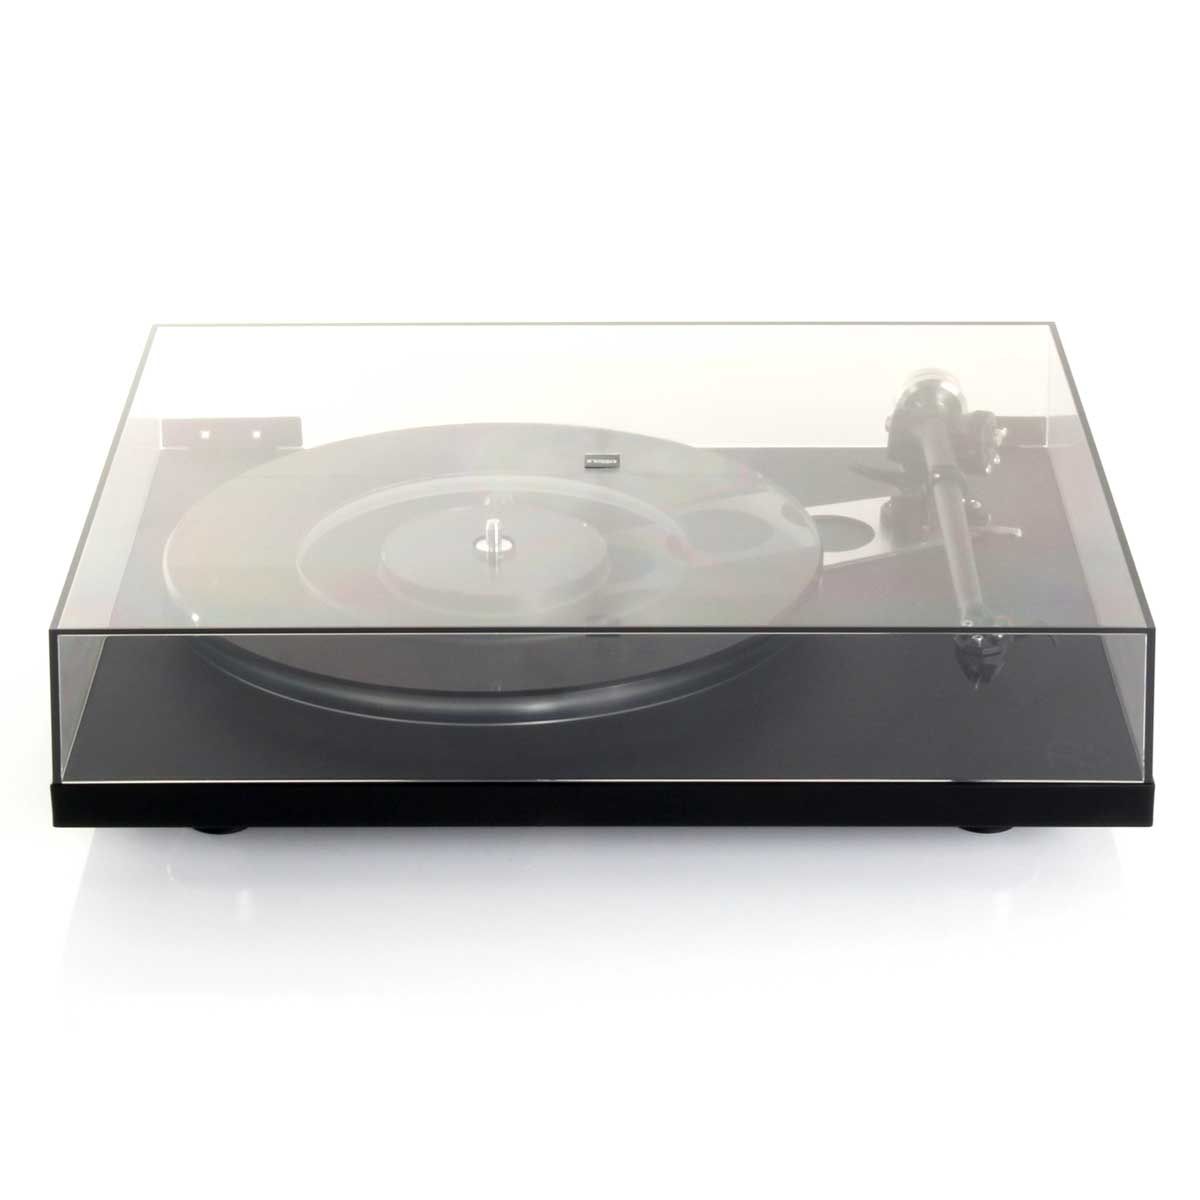 Rega Planar 6 Turntable - Polaris Gray - front view with dustcover closed